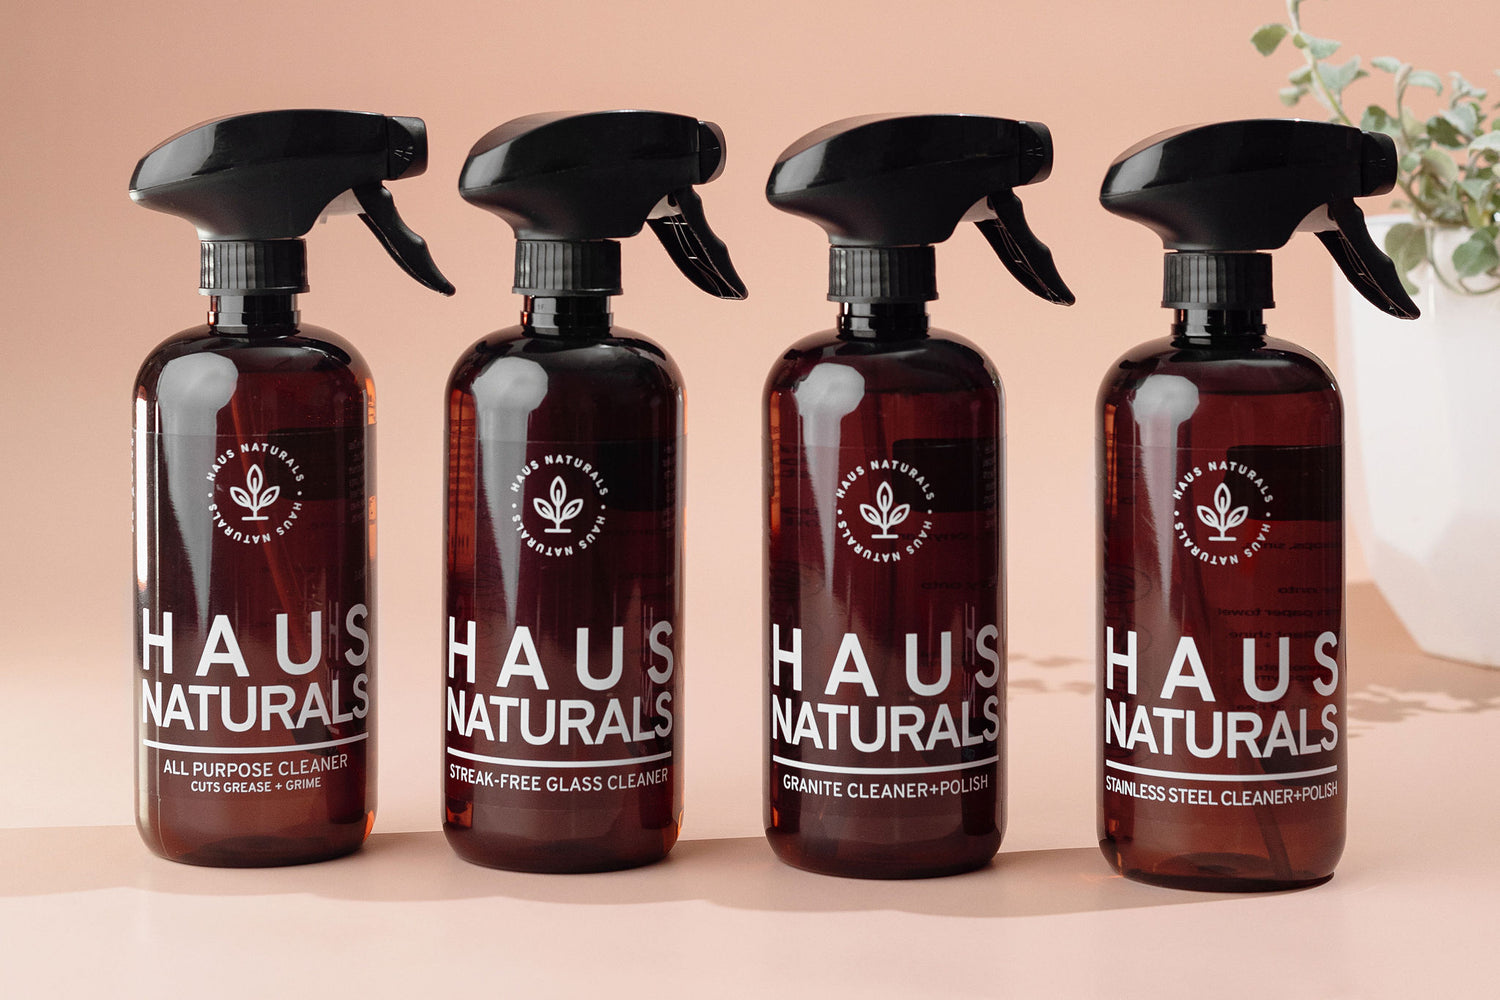 Haus Naturals natural cleaning products